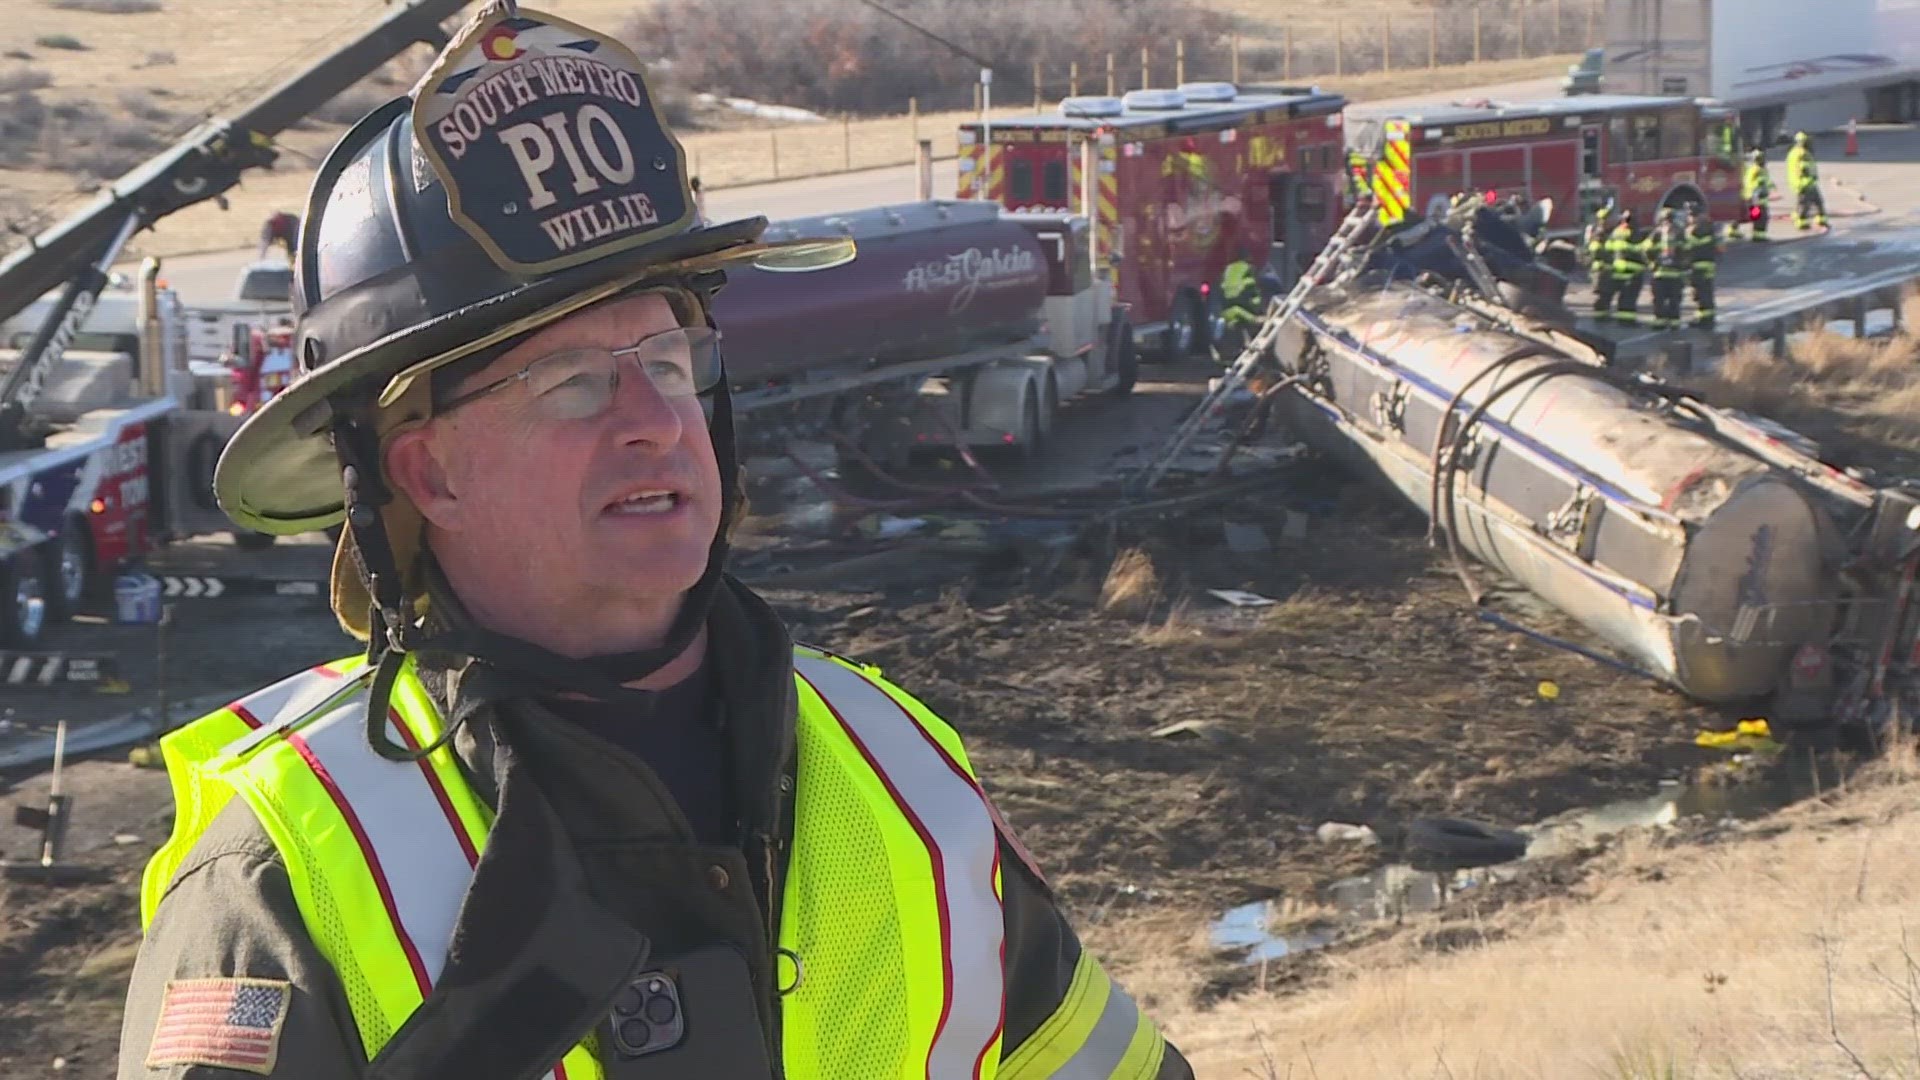 About 2,500 gallons spilled from the tanker after it crashed on Interstate 25 in Castle Pines, South Metro Fire Rescue in Colorado said.